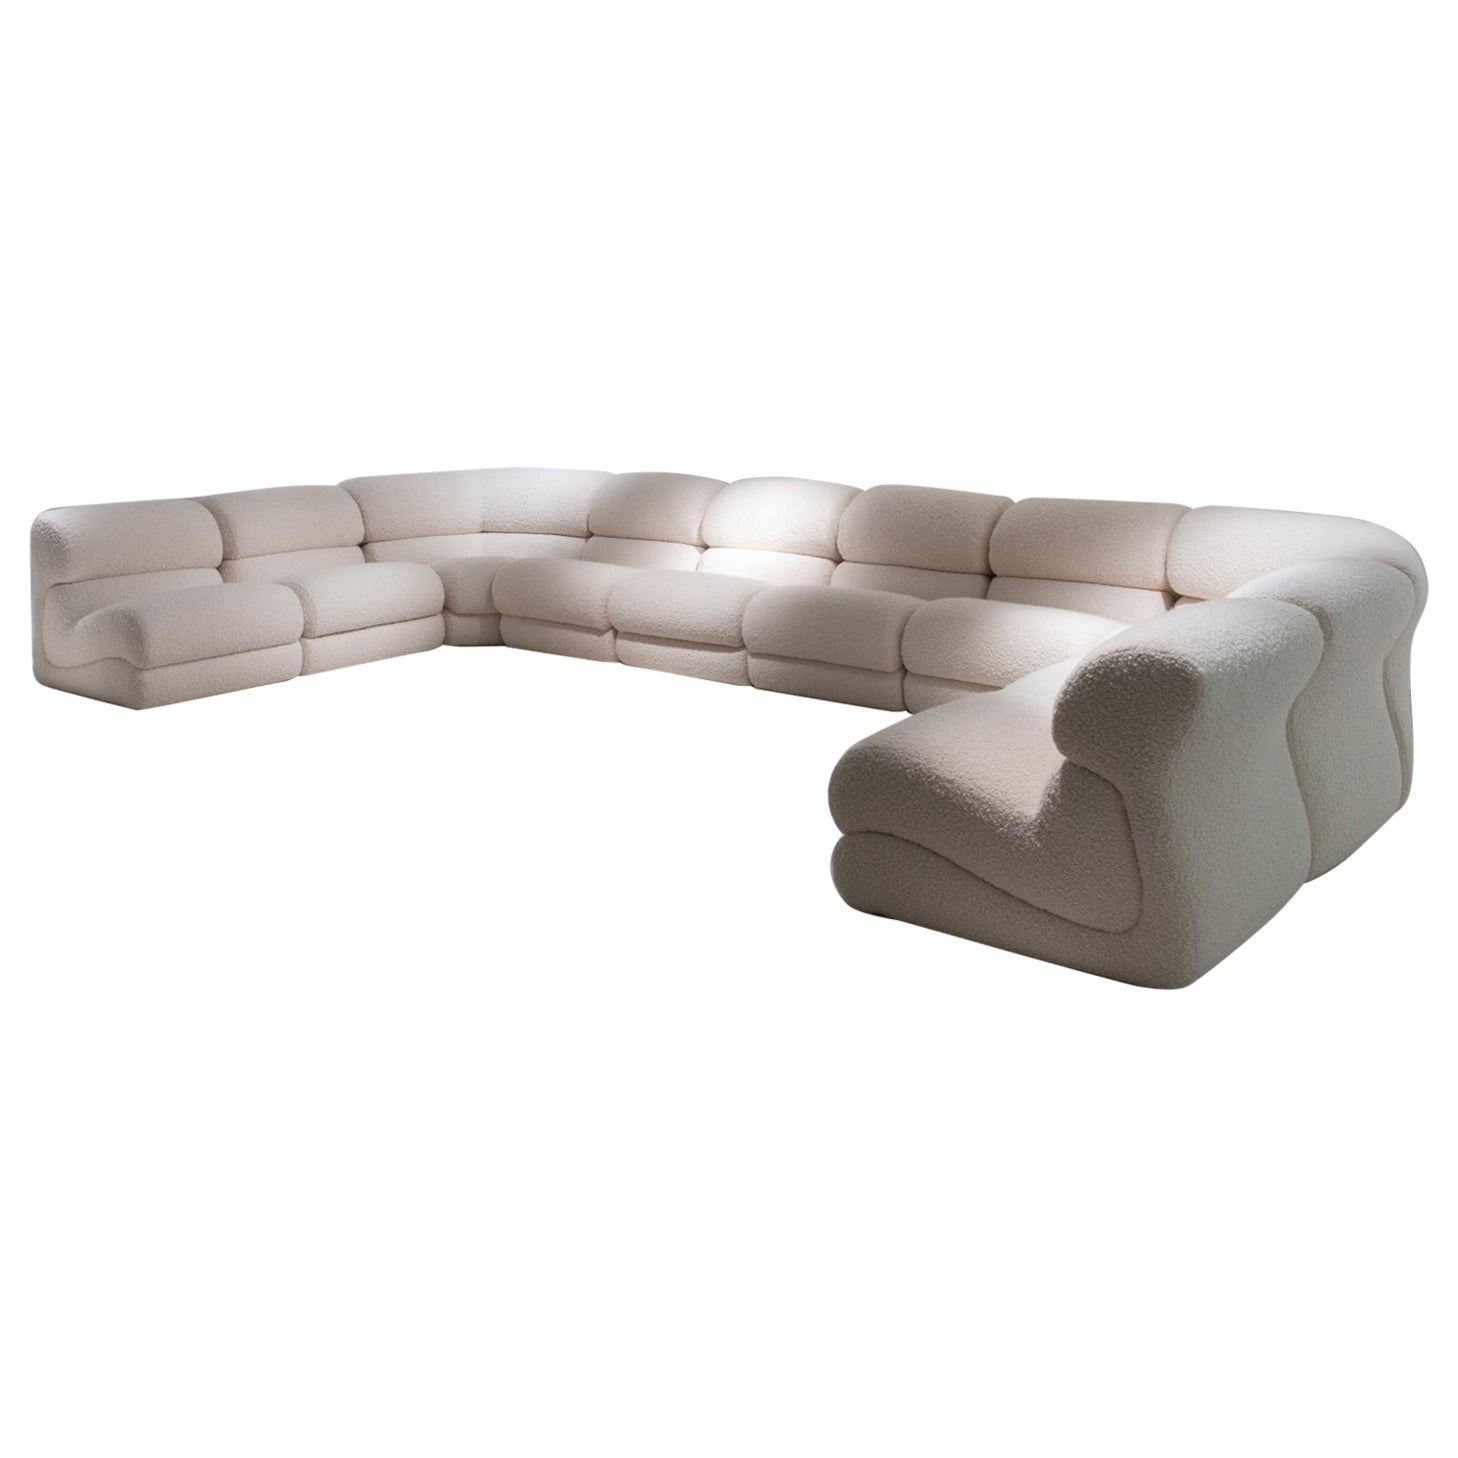 Modular sofa by G.rossi For Sale